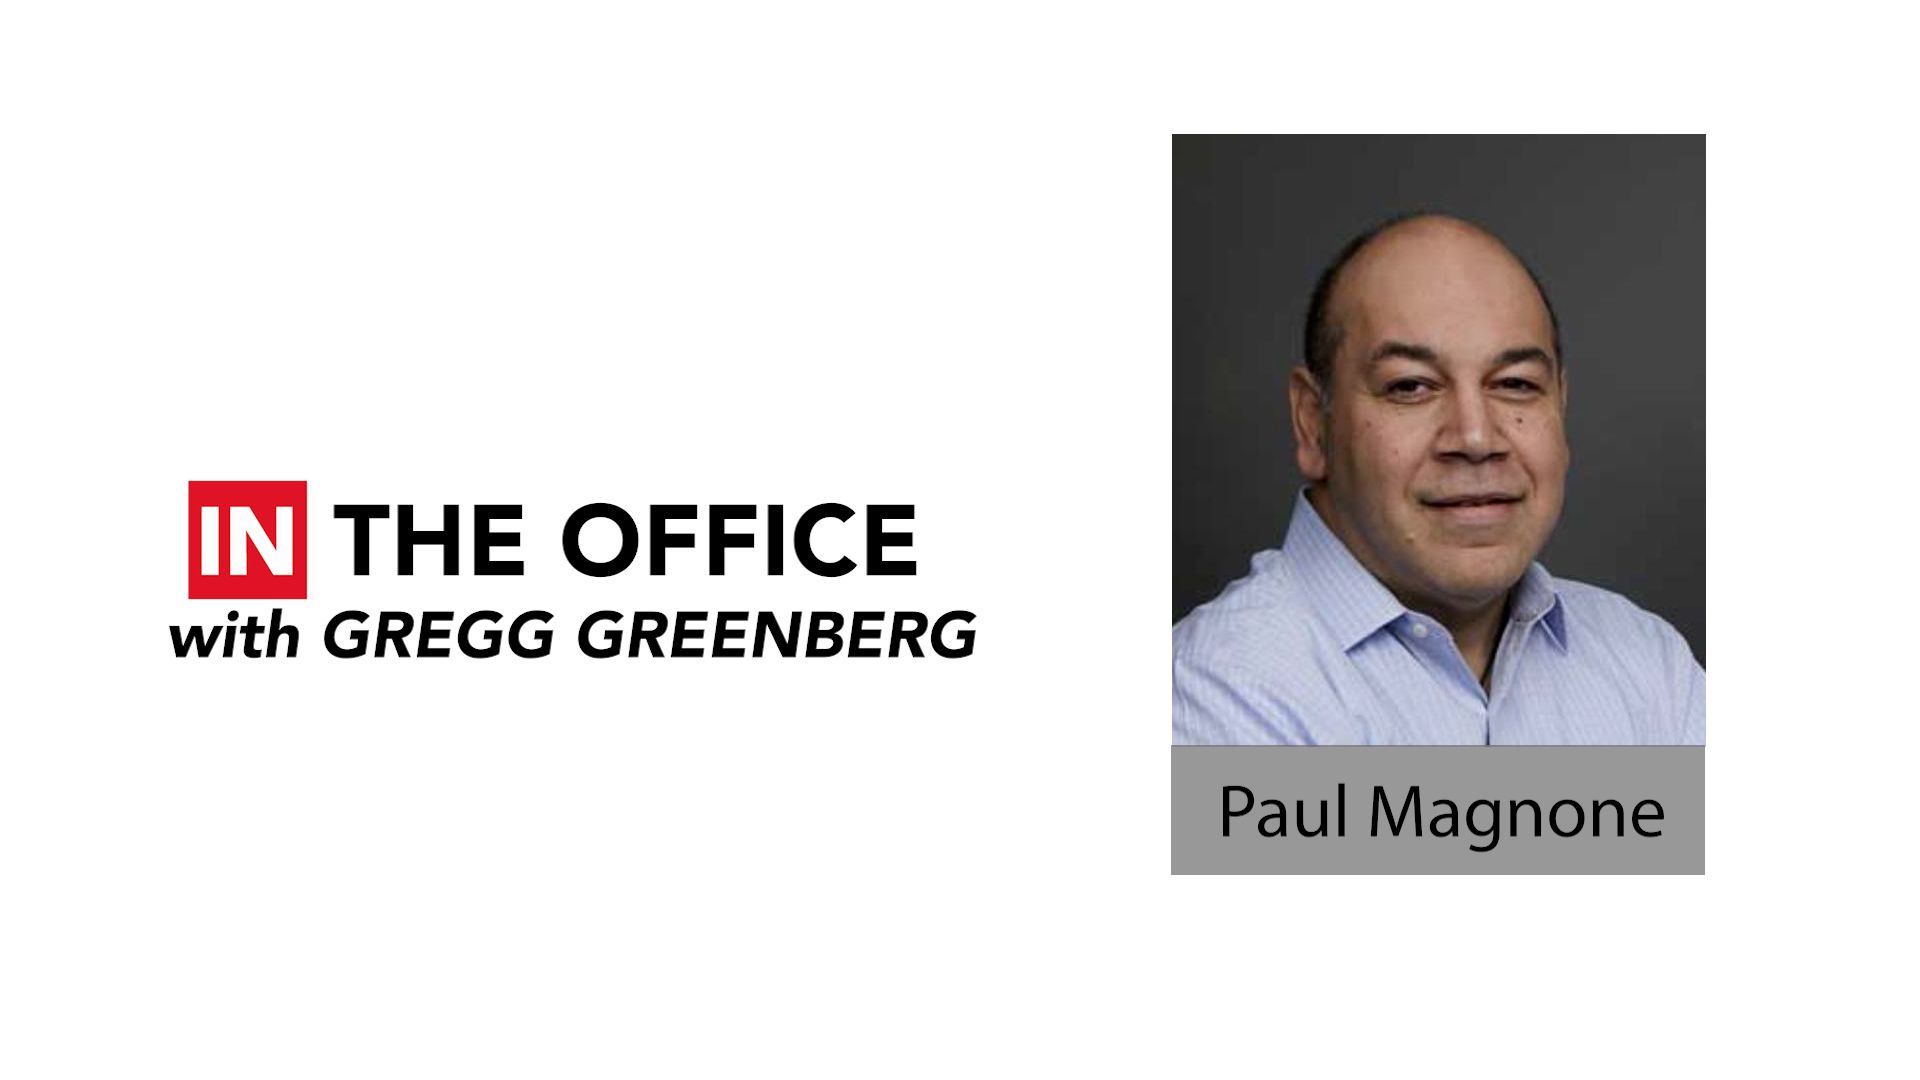 ‘IN the Office’ with decision-making expert and author Paul Magnone